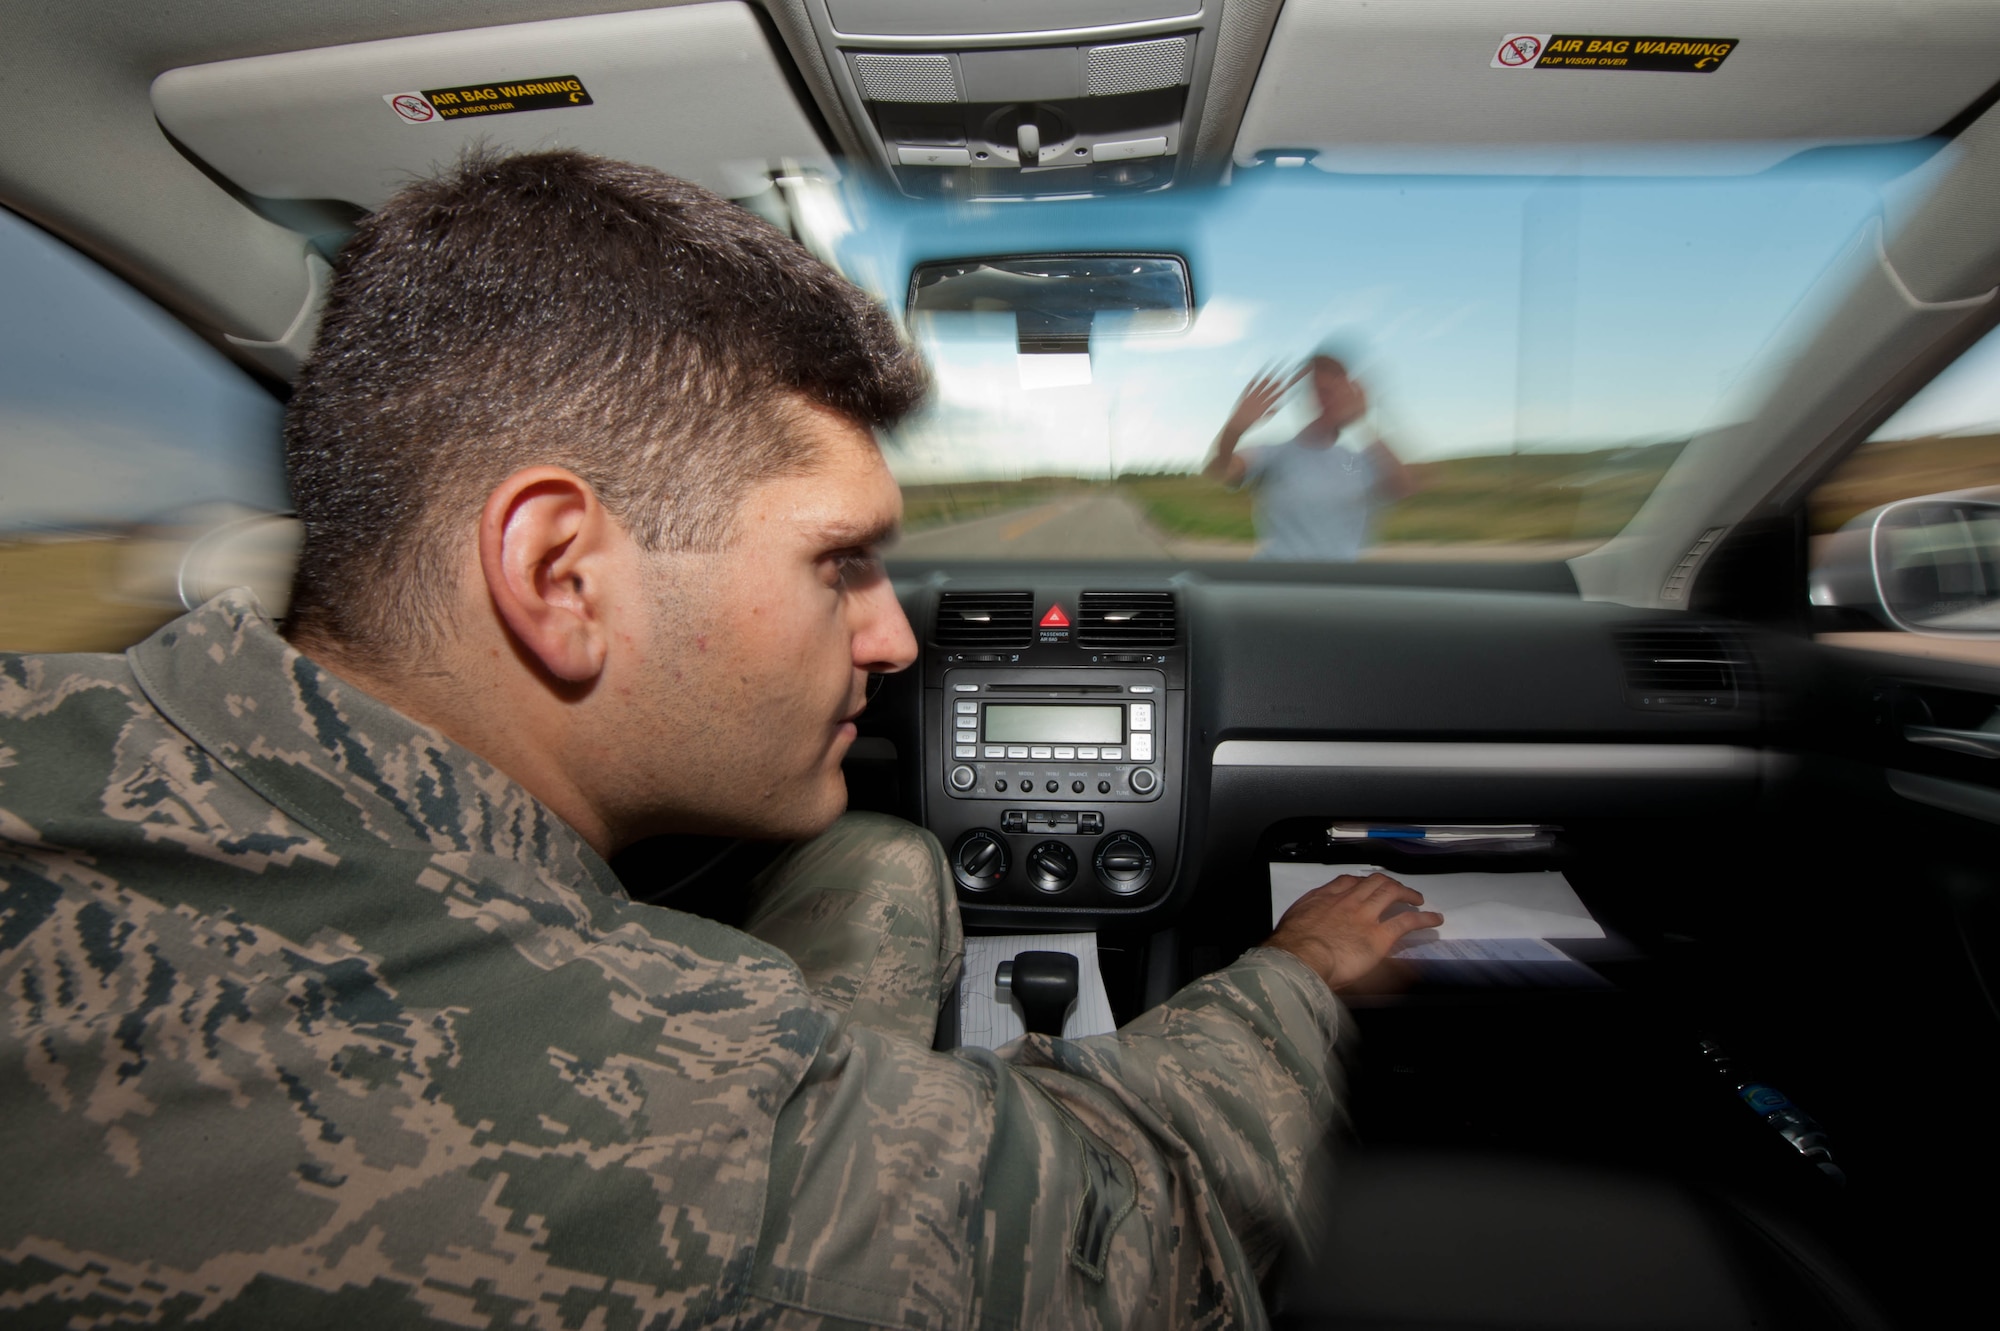 Few may realize that while they are behind the wheel, they are in control of a 2,000-pound guided missile capable of inflicting property damage, personal injury and even taking their lives and that of others. Air Force Instruction 31-218 "Motor Vehicle Traffic Supervision," along with Ellsworth's supplement 31-204, clearly states the regulations for the safe operation of motor vehicles while on base. (U.S. Air Force photo by Airman 1st Class Zachary Hada/Released)